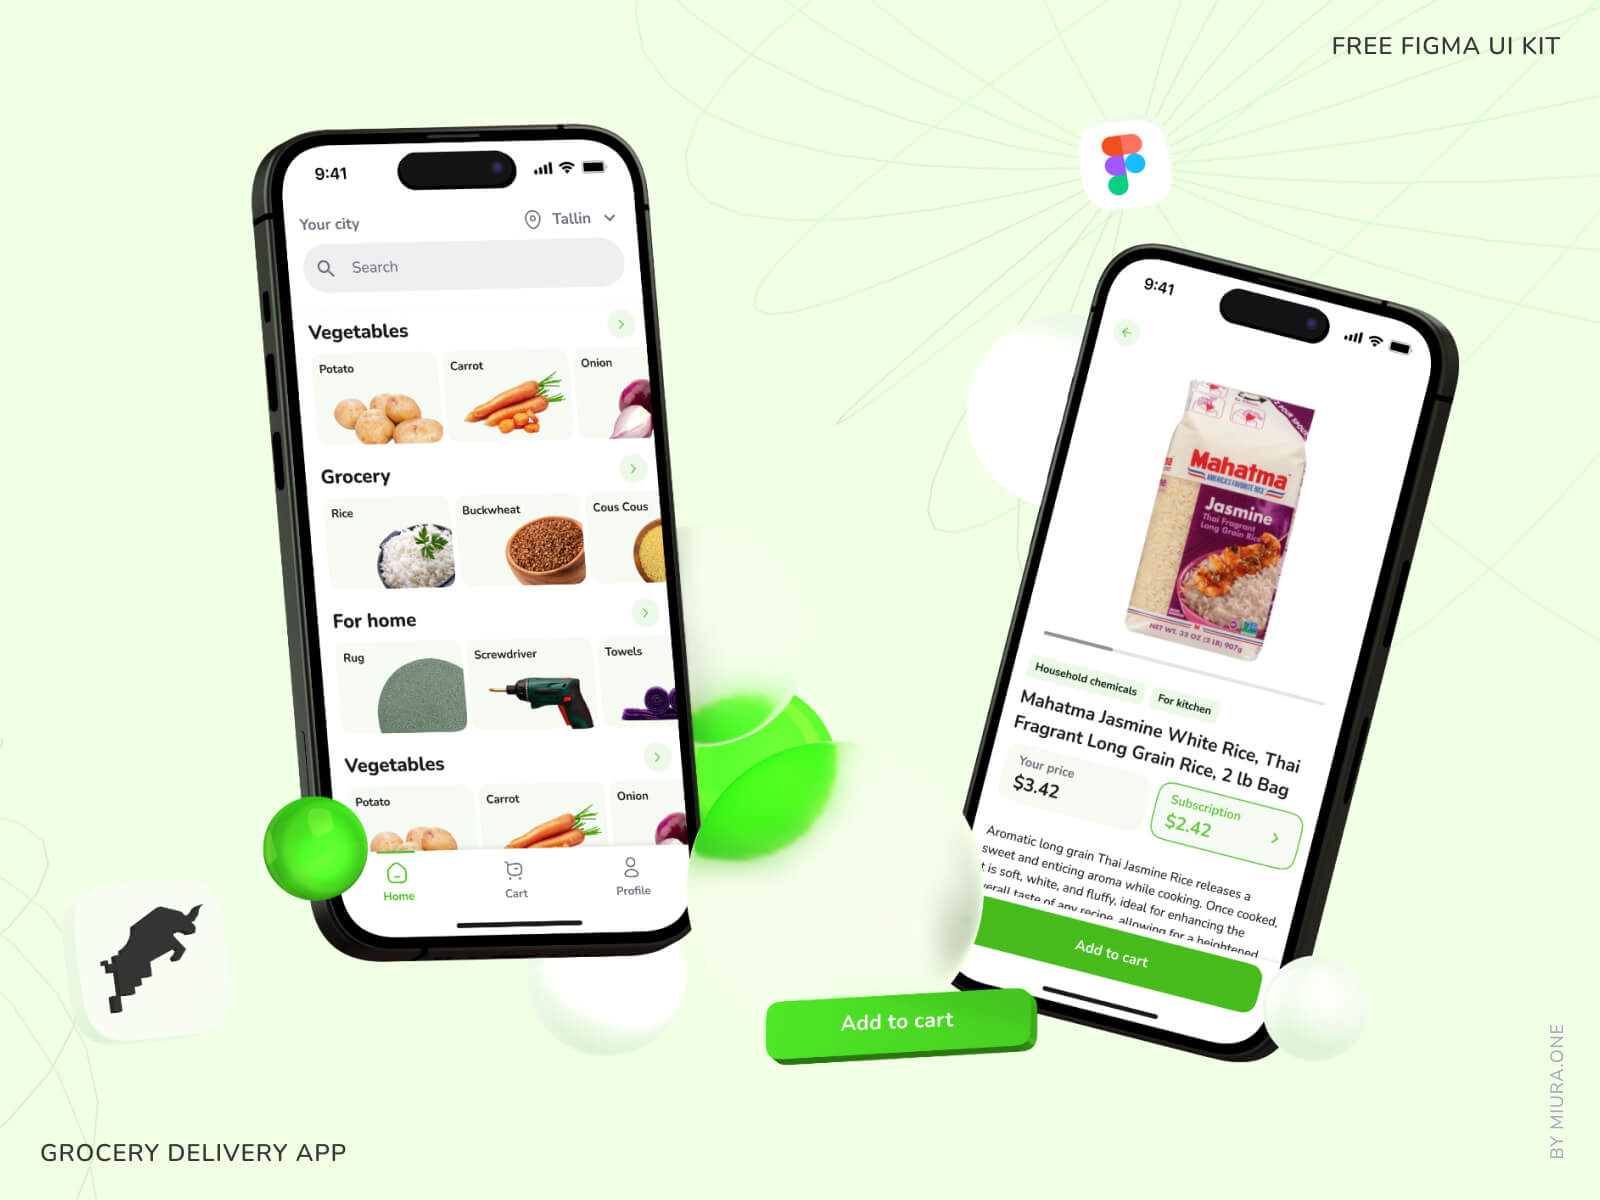 Free Figma Groceries Delivery App UI Kit2